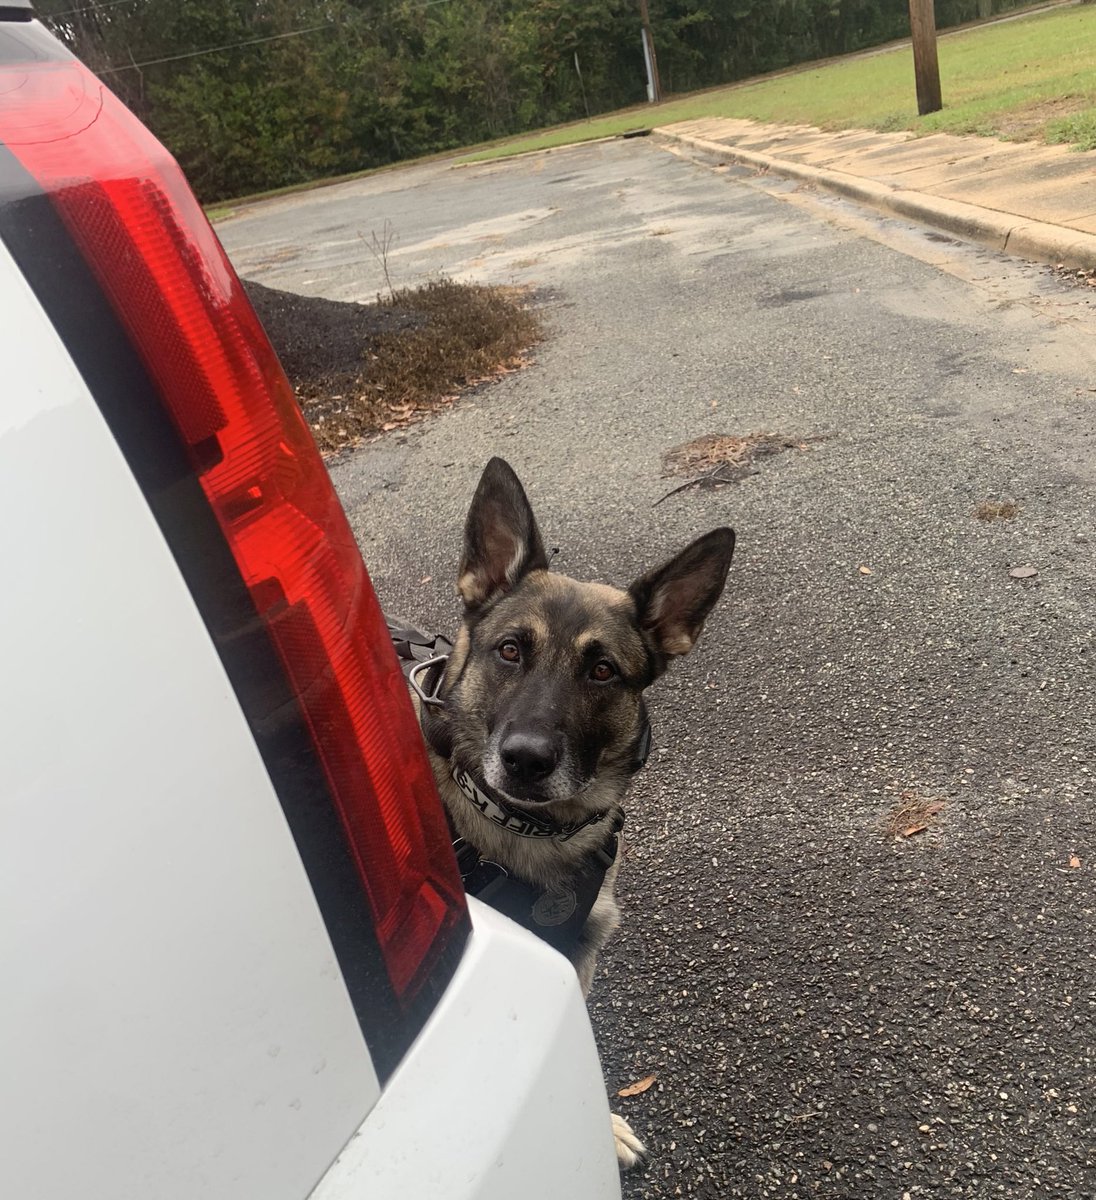 Ghost wants dad to hurry up and open the hatch so he can jump in & get himss toys… his facial impatience speaks volumes. Hurry up, Dad!! Geesh! #DailyDoseOfK9Ghost